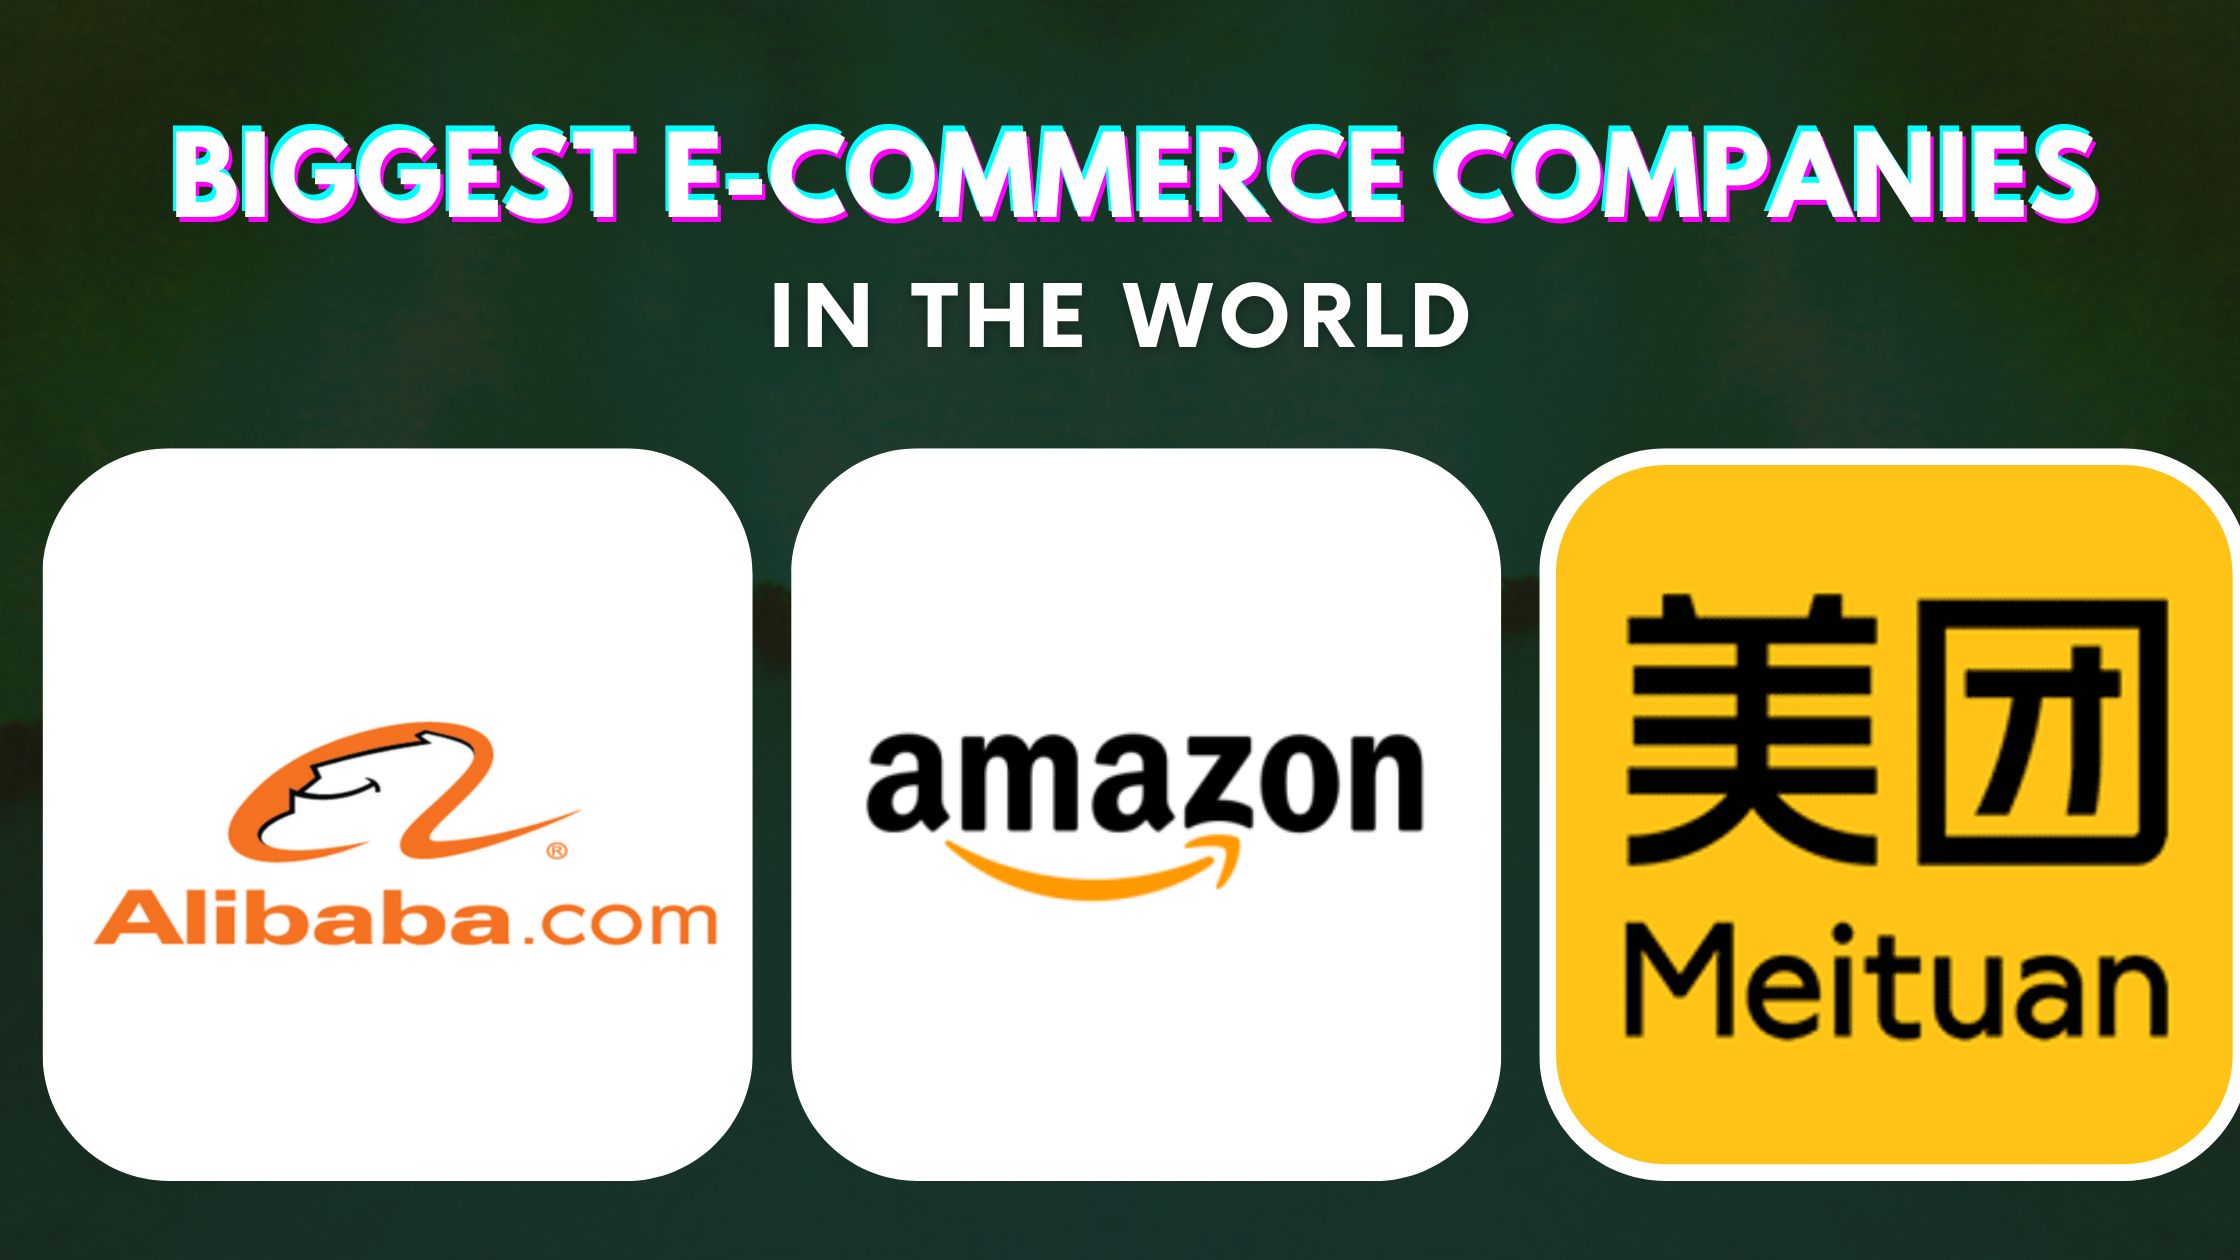 Top 10 Biggest E-Commerce Companies in The World (2022)